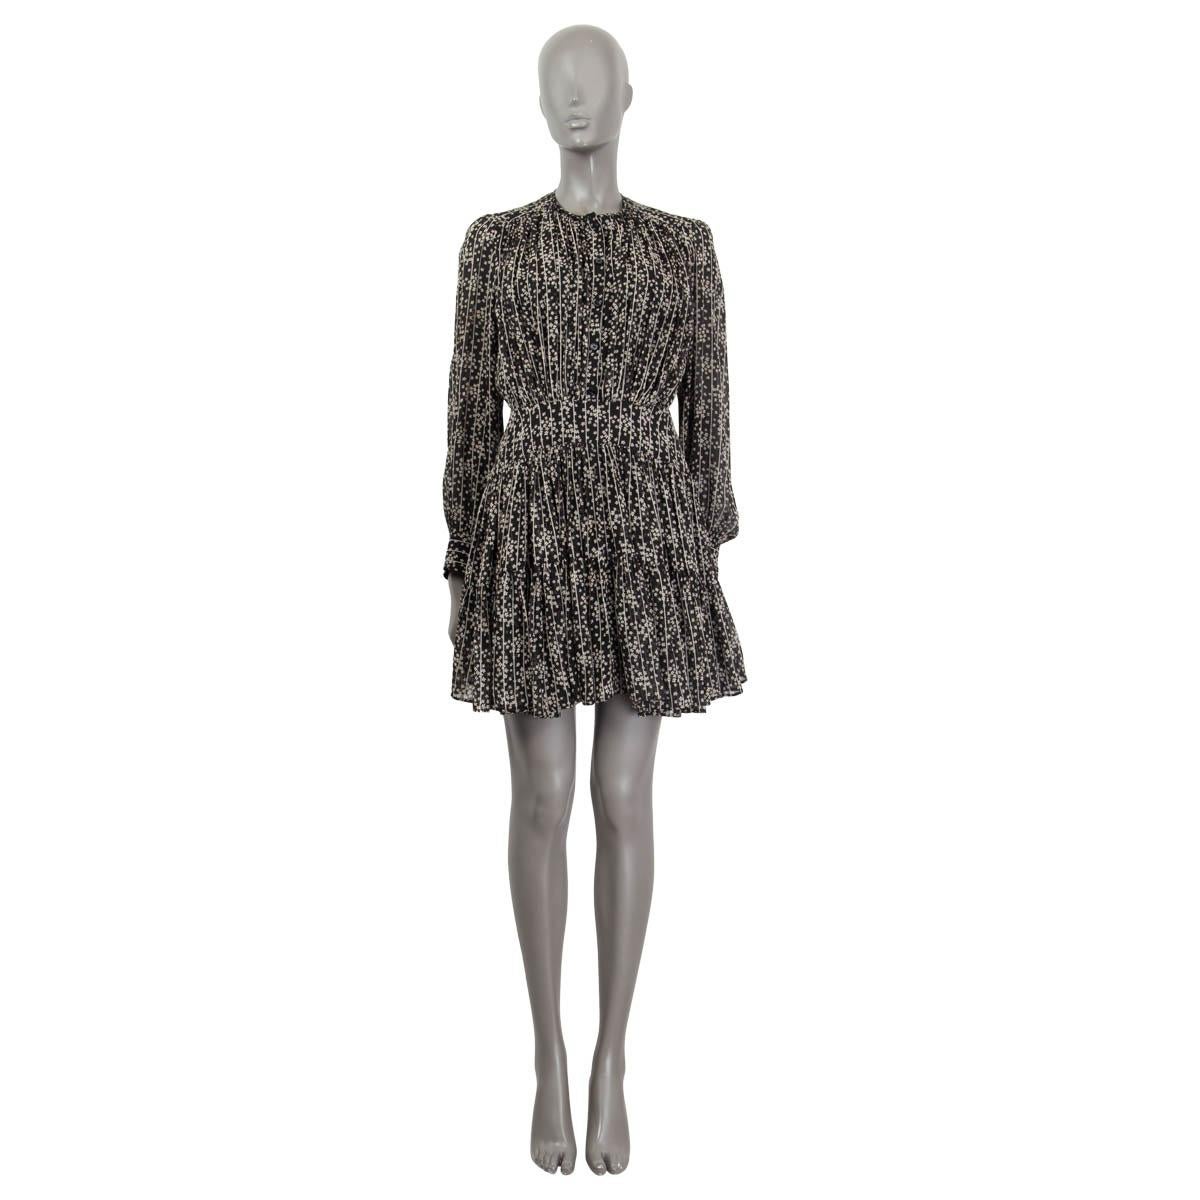 100% authentic Chloé floral print mini dress in black and white silk georgette (100%). Features a crew-neck and buttoned cuffs. Has long sleeves and is gathered at the waist. Opens with five buttons at the front and a concealed zipper at the side.